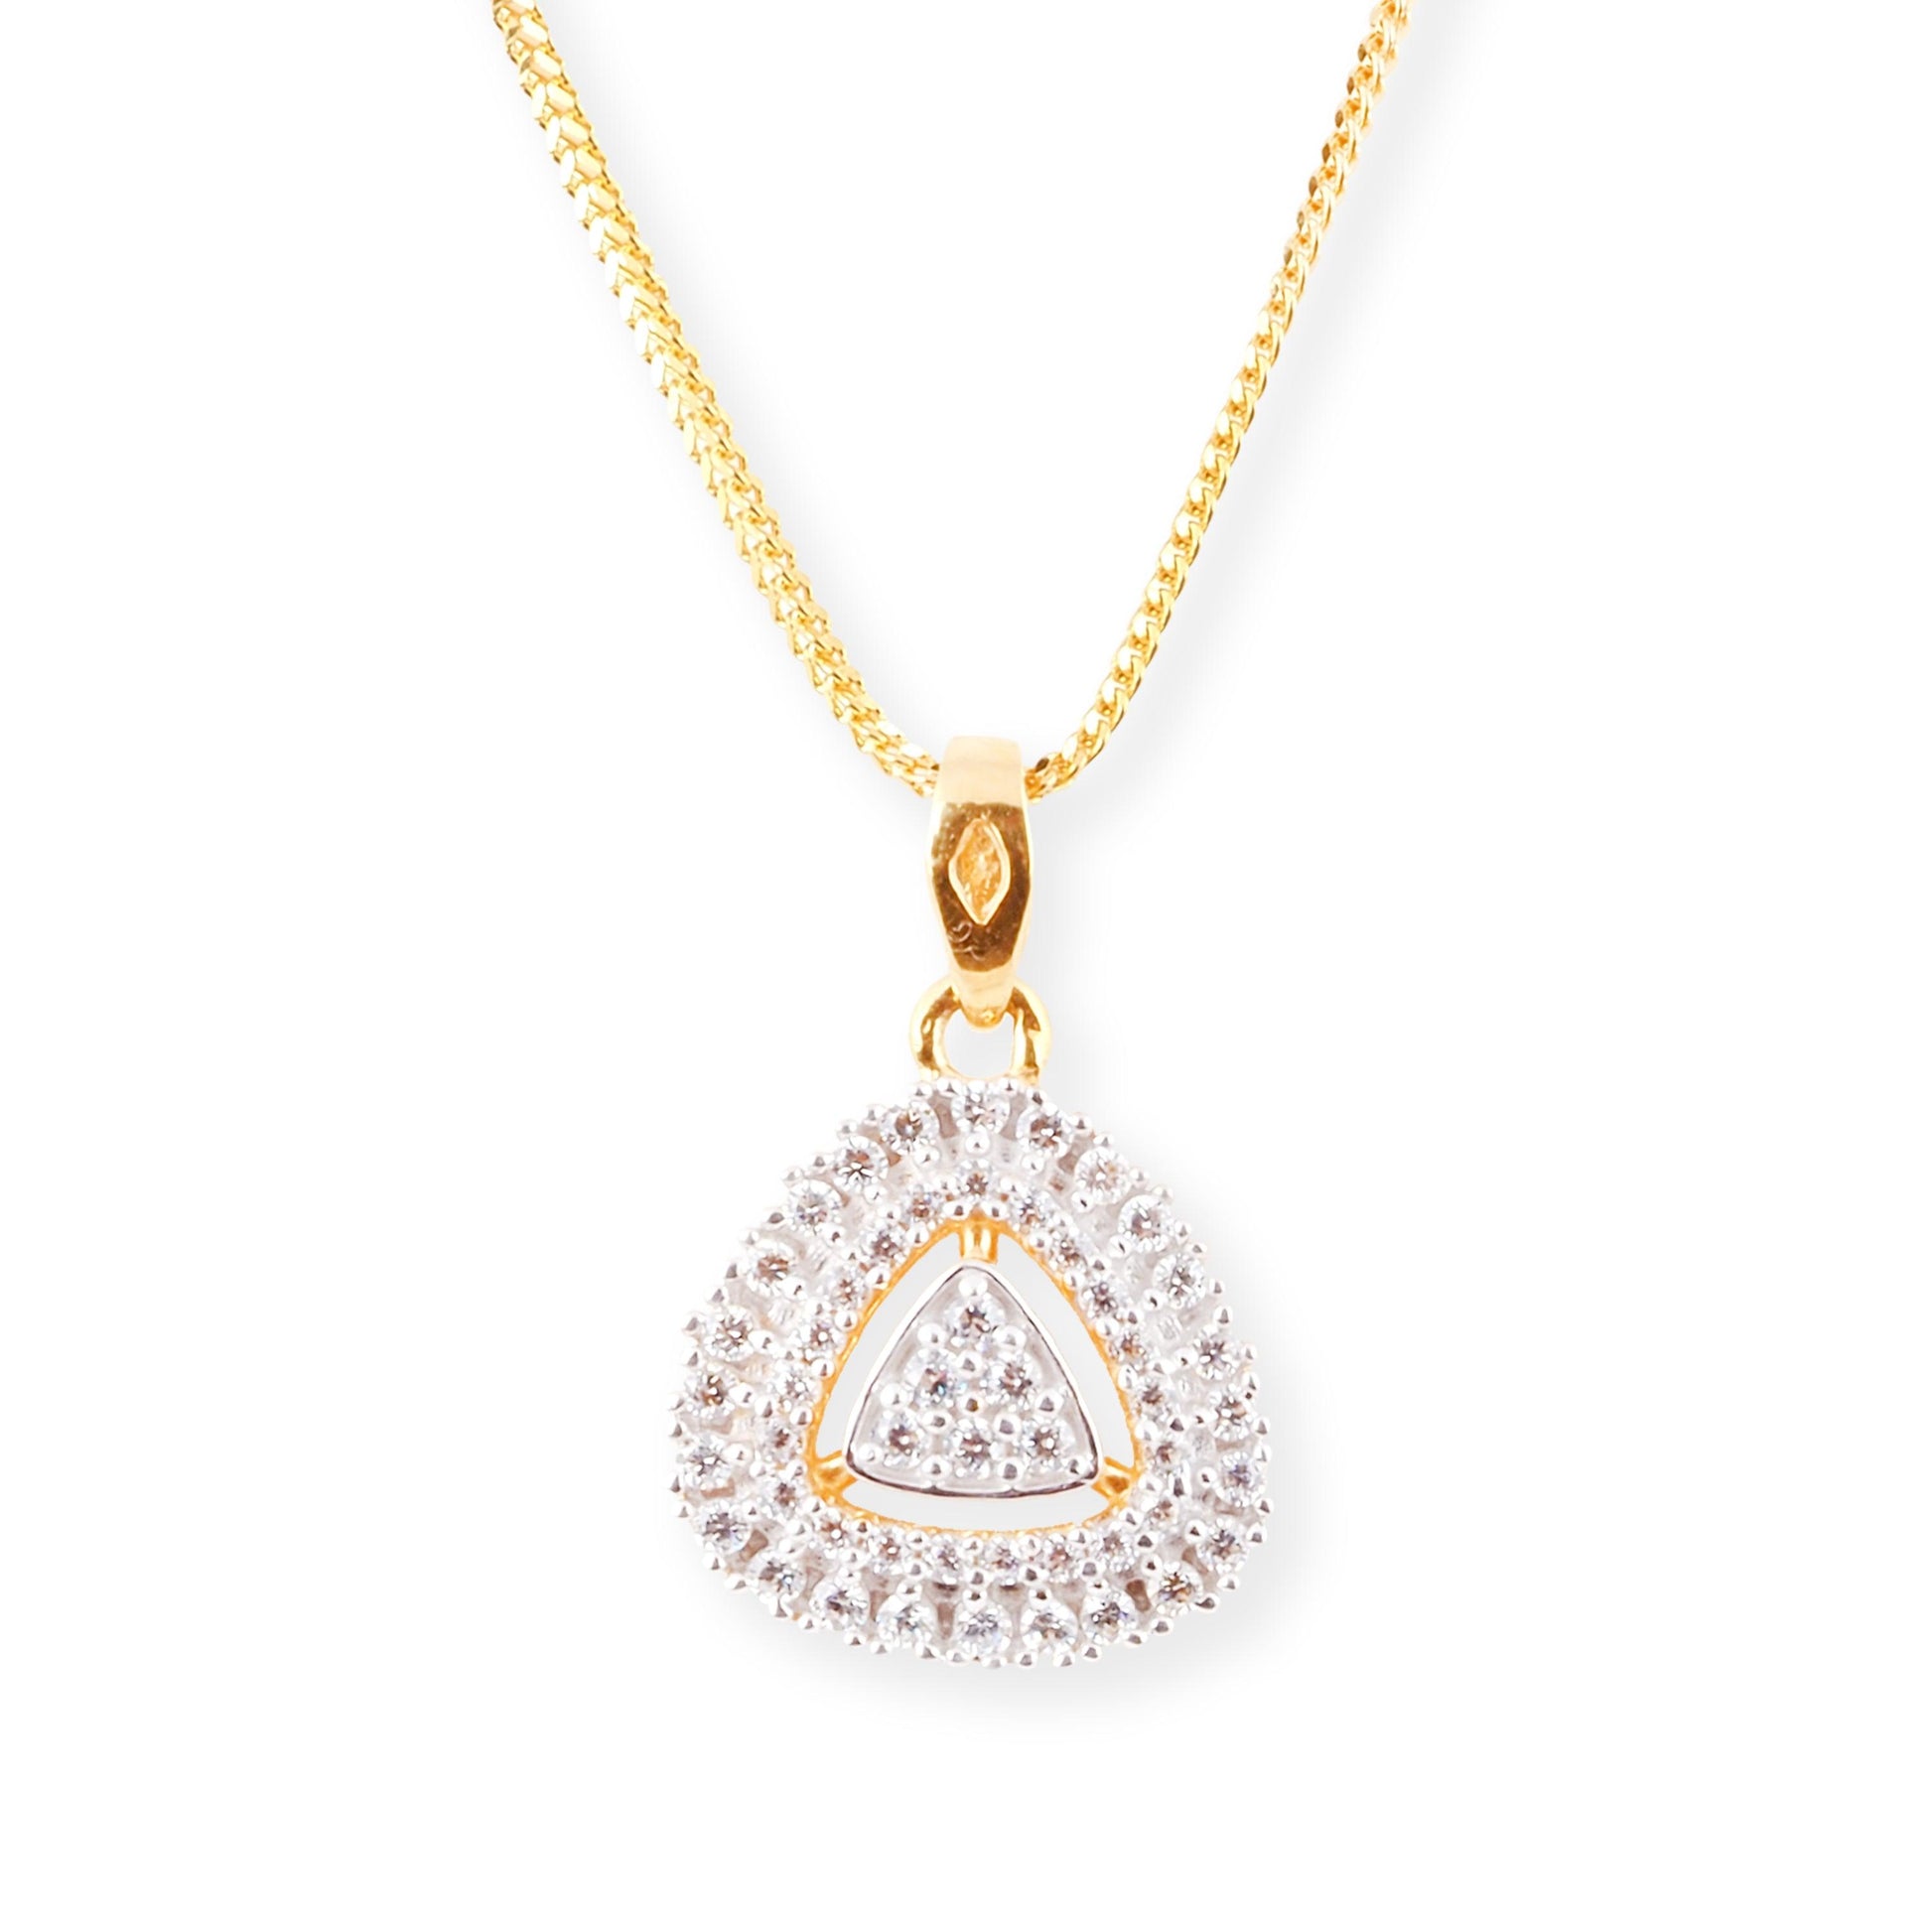 22ct Gold Pendant Set with White Cubic Zirconia Stones (Pendant + Chain + Stud Earrings)-8539 - Minar Jewellers